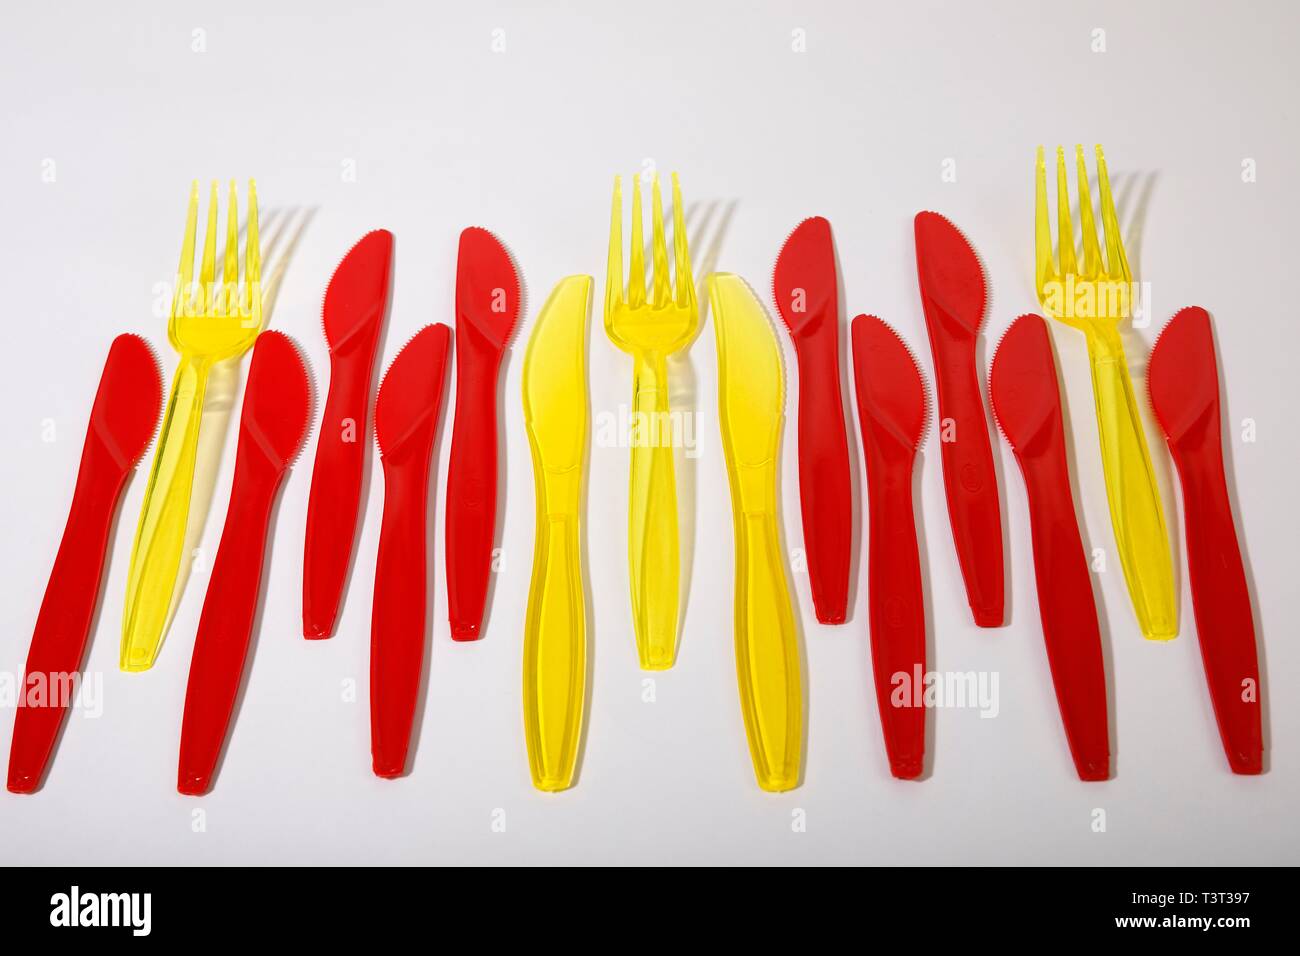 Red and yellow plastic cutlery, plastic knives, plastic forks, plastic waste, Germany Stock Photo